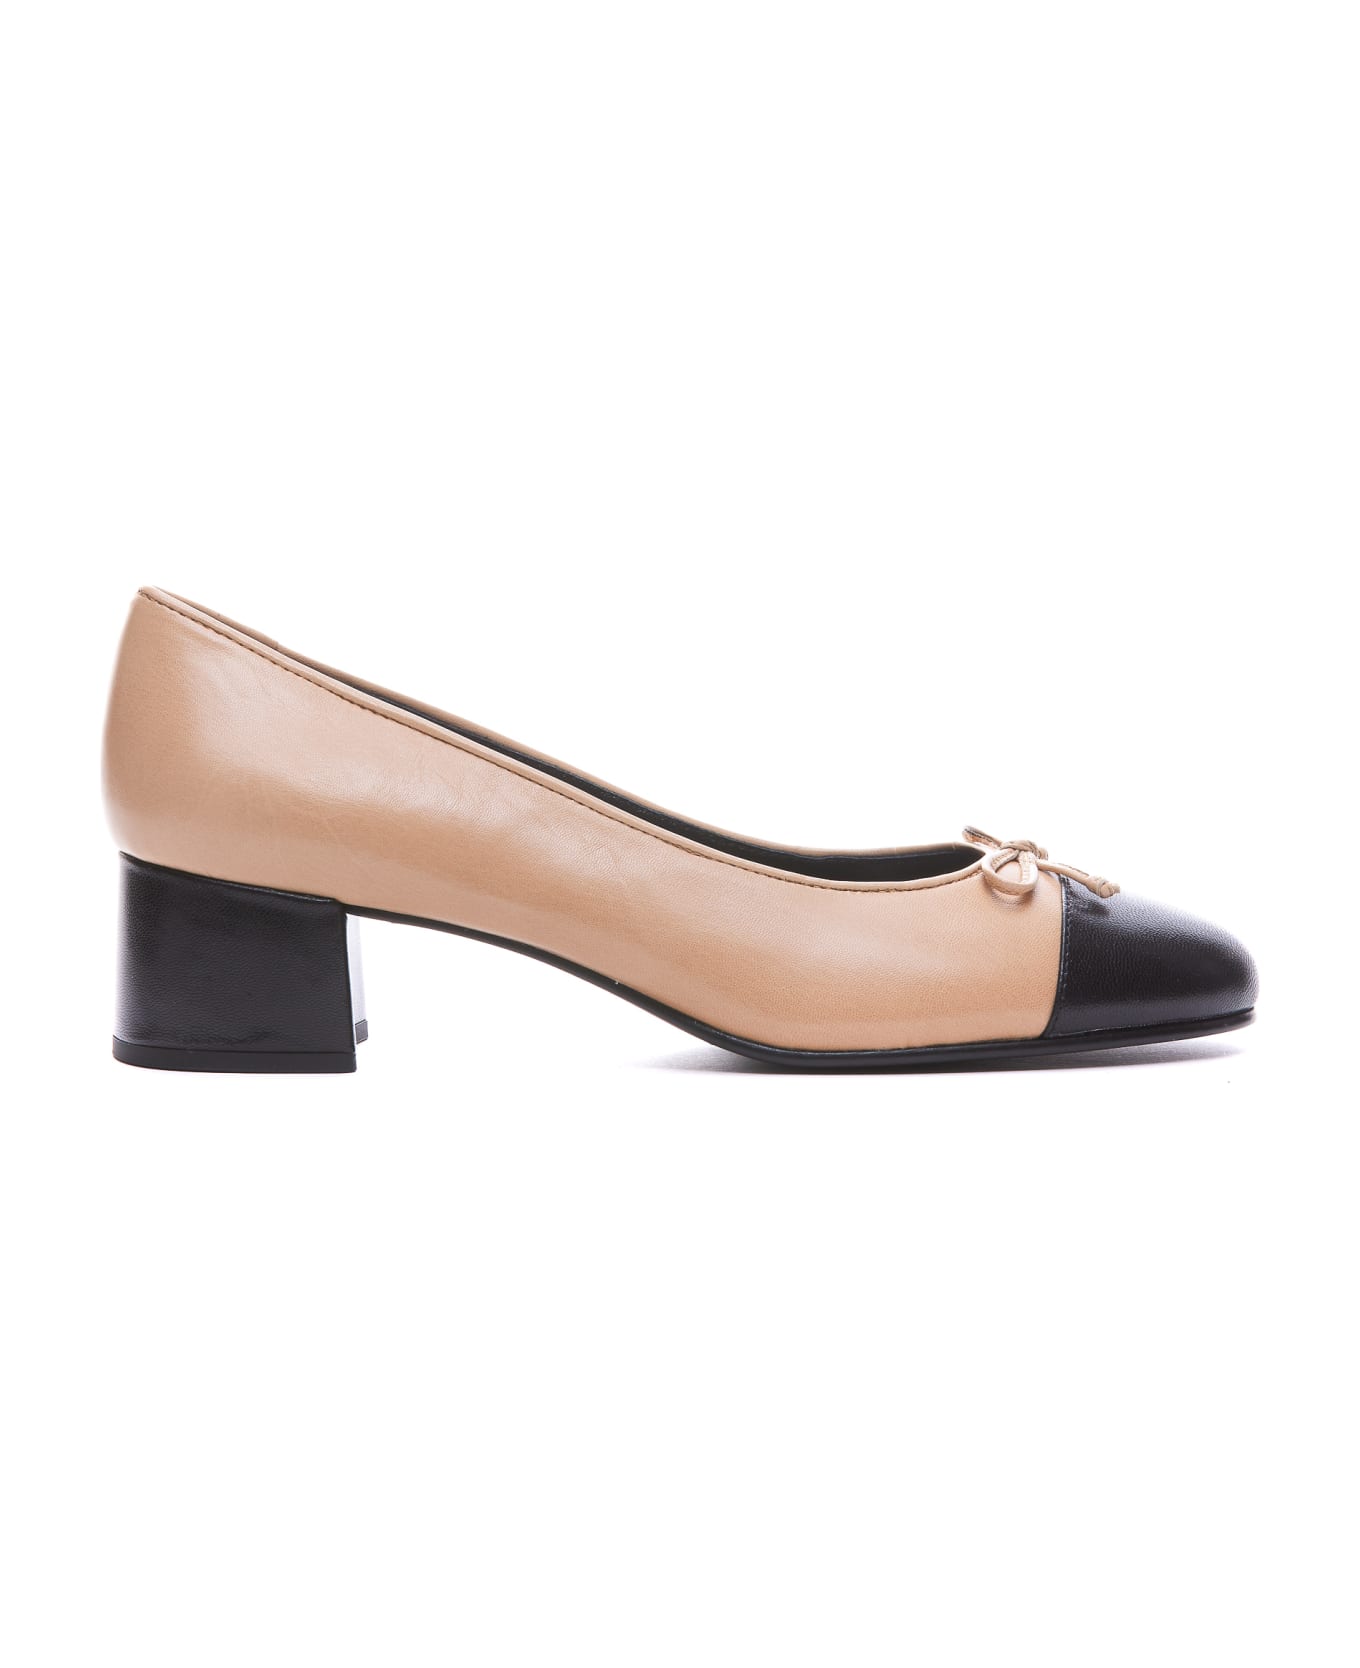 Tory Burch Ballet Flats With Bow Detail And Bi-color Toe In Smooth Leather - Beige